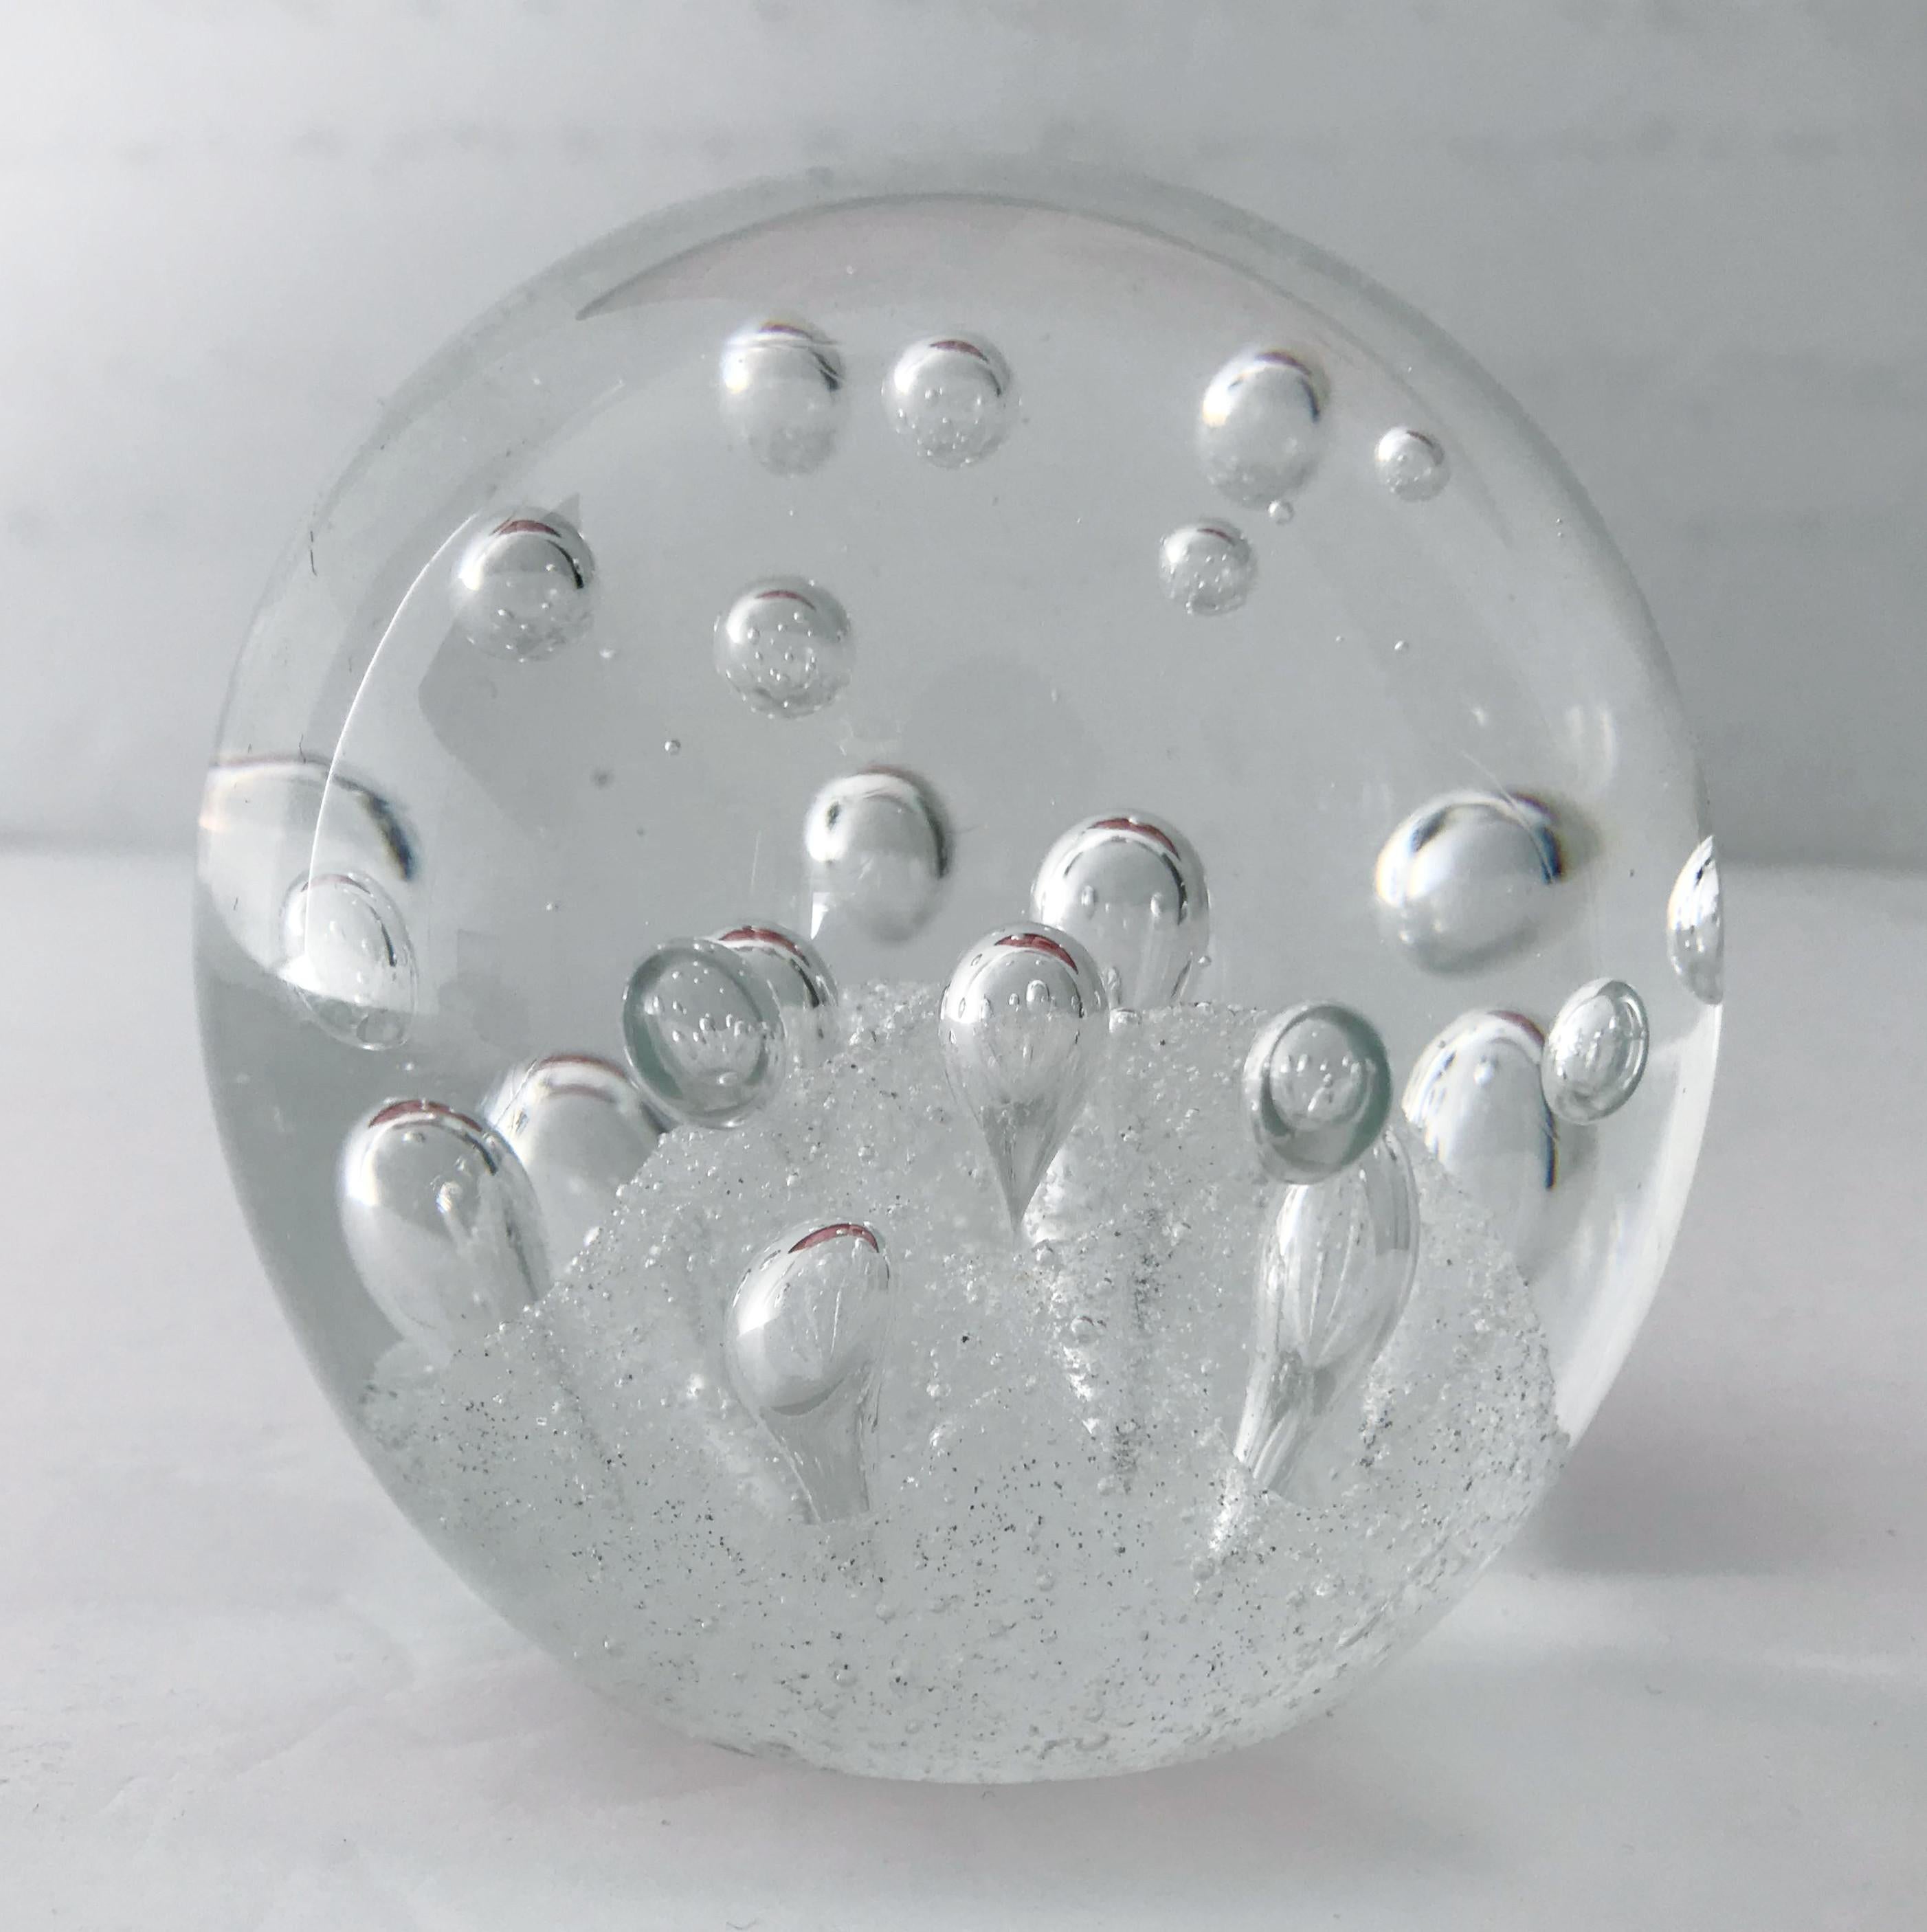 Vintage Italian clear Murano glass paperweight hand blown with bollicine technique / Made in Italy, circa 1960s
Measures: Diameter 3.75 inches
1 in stock in Palm Springs ON 50% OFF SALE for $299 !!
Order reference #: FABIOLTD G147
This piece makes